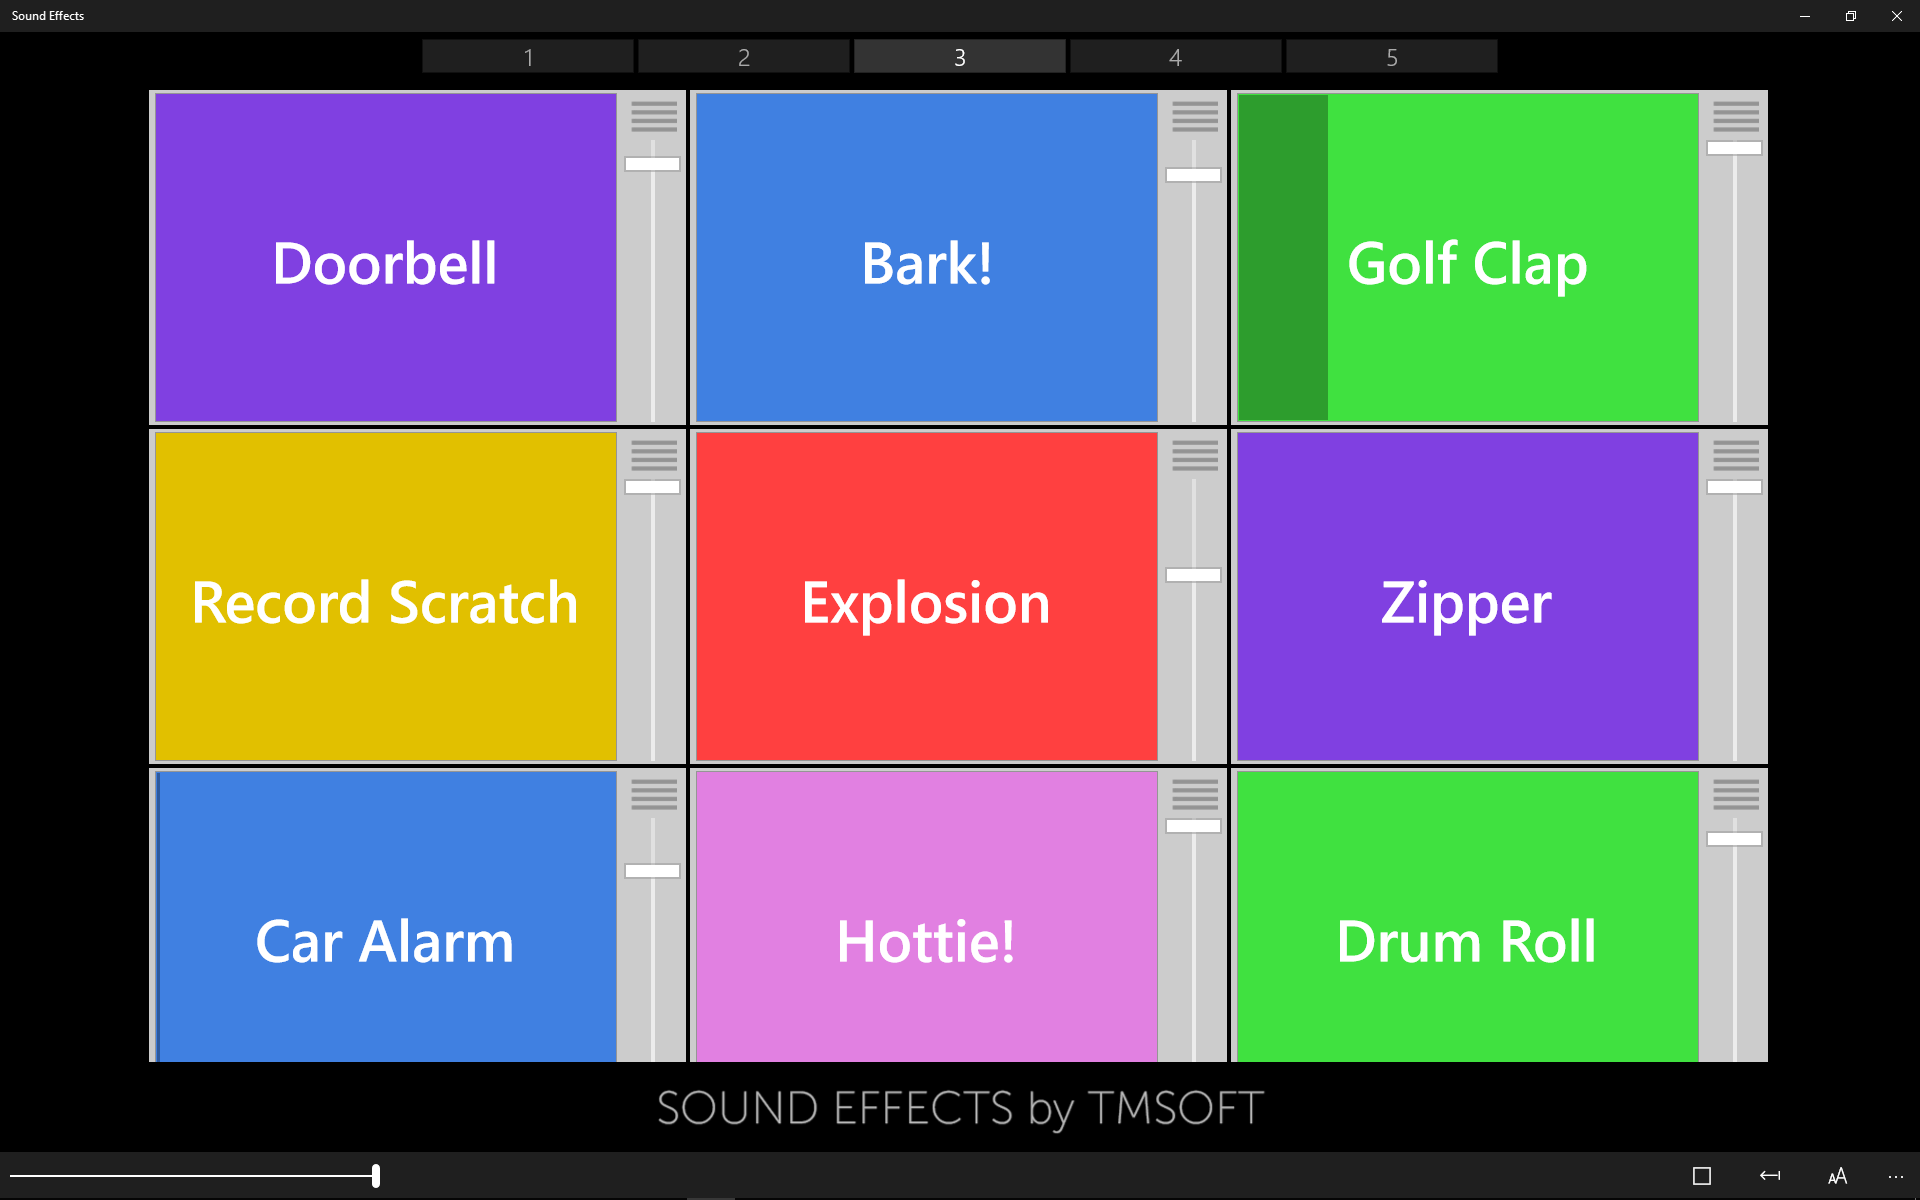 Change the size of your sound tiles from small to extra-large.  Perfect for all screen sizes!